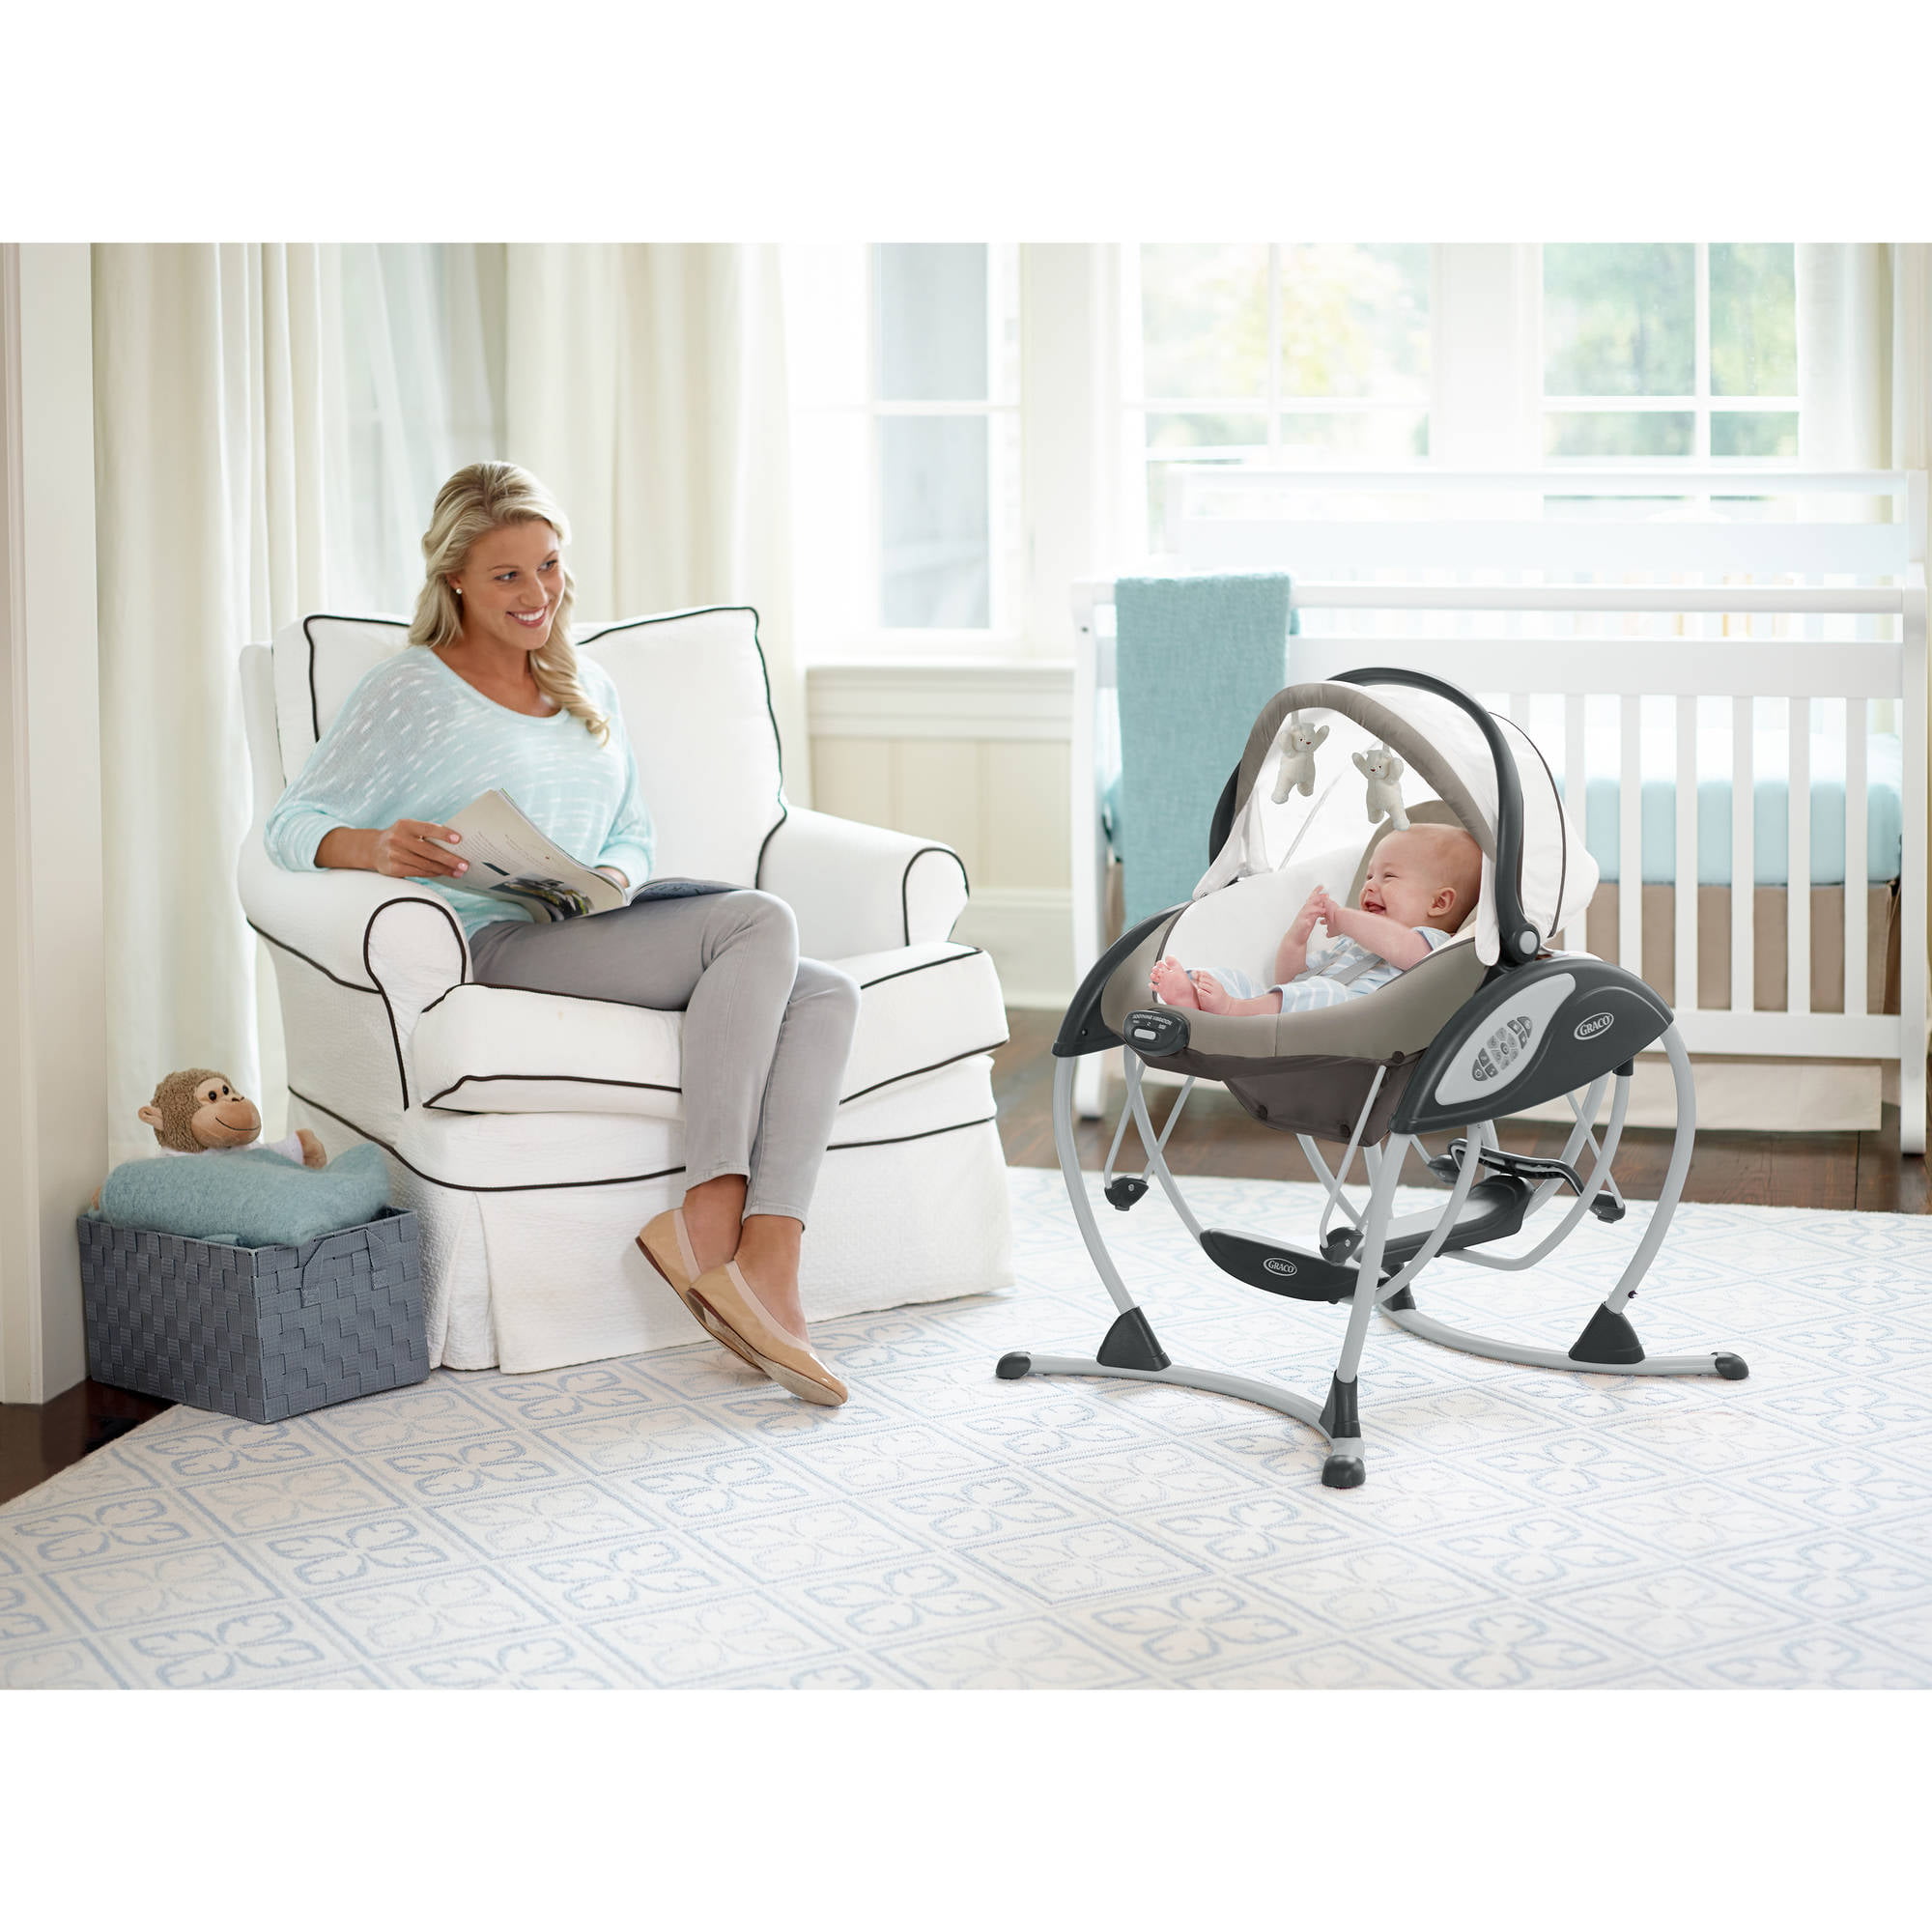 target graco dreamglider